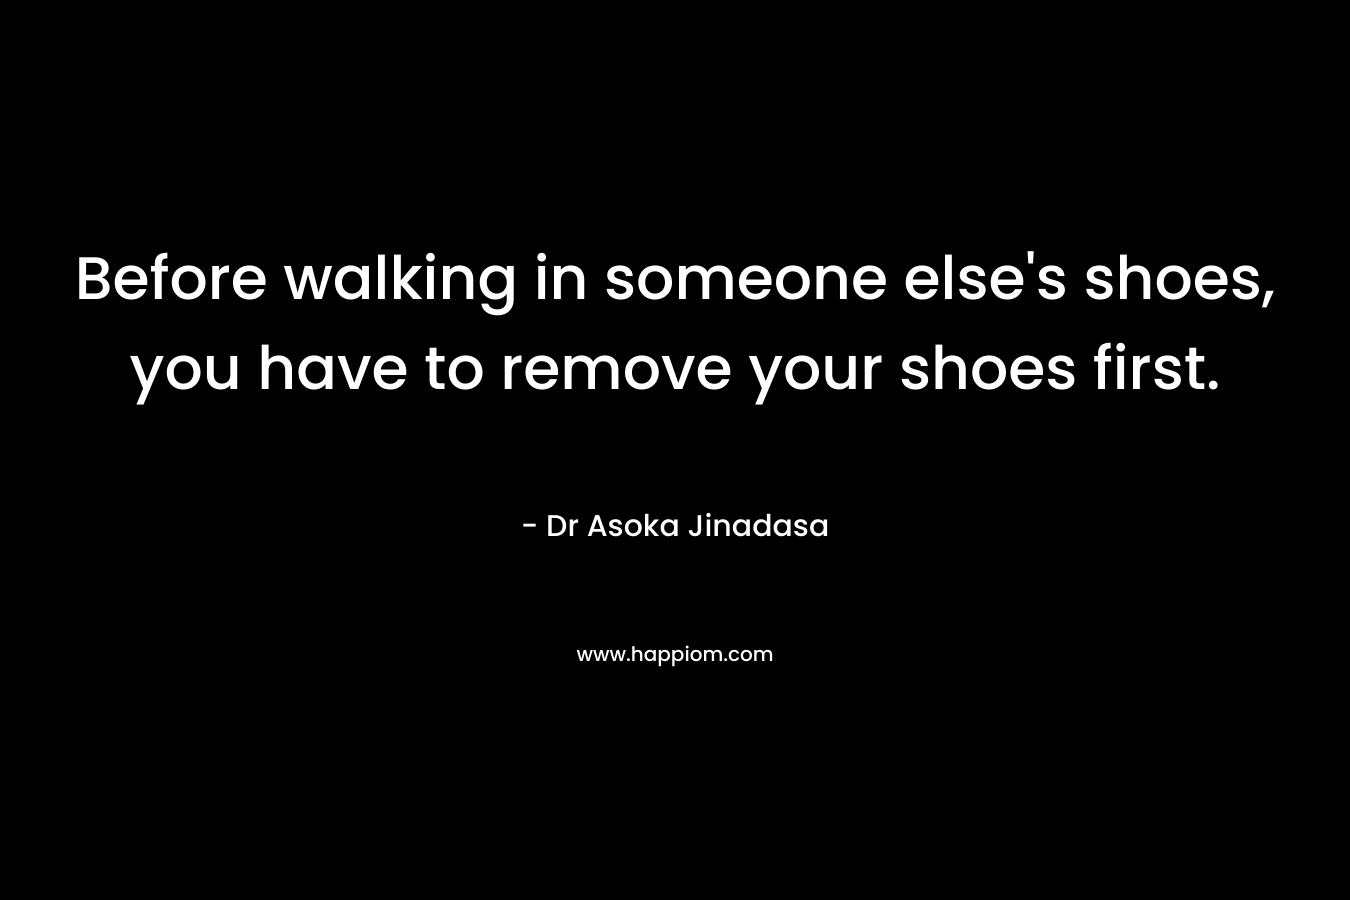 Before walking in someone else’s shoes, you have to remove your shoes first. – Dr Asoka Jinadasa